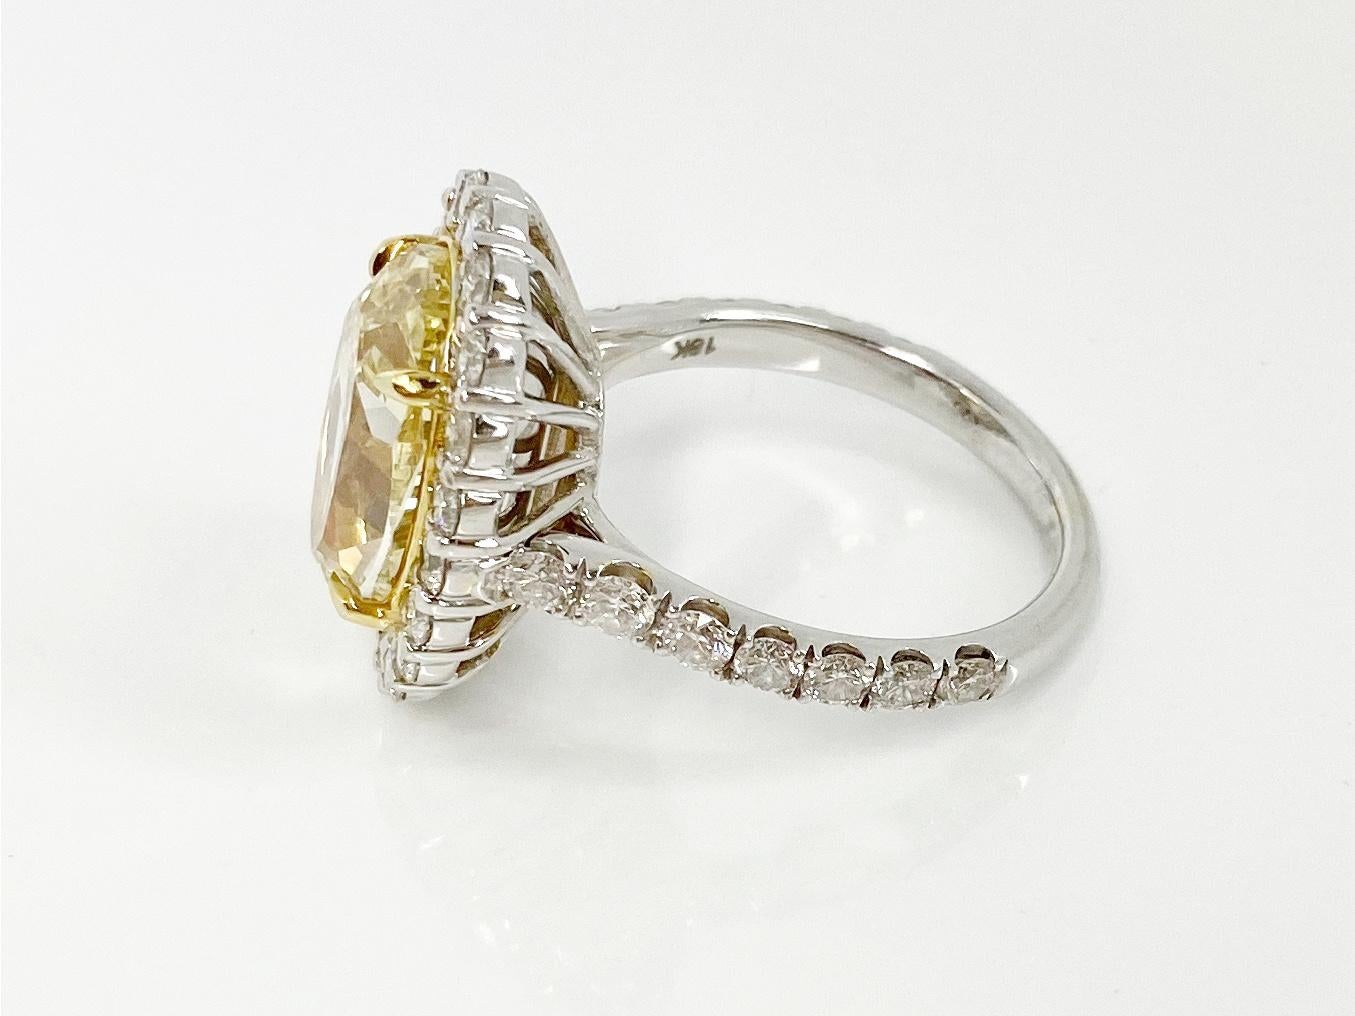 GIA Certified 6.08 Carat, Oval Cut, Fancy Intense Yellow Diamond Ring In New Condition For Sale In Calabasas, CA